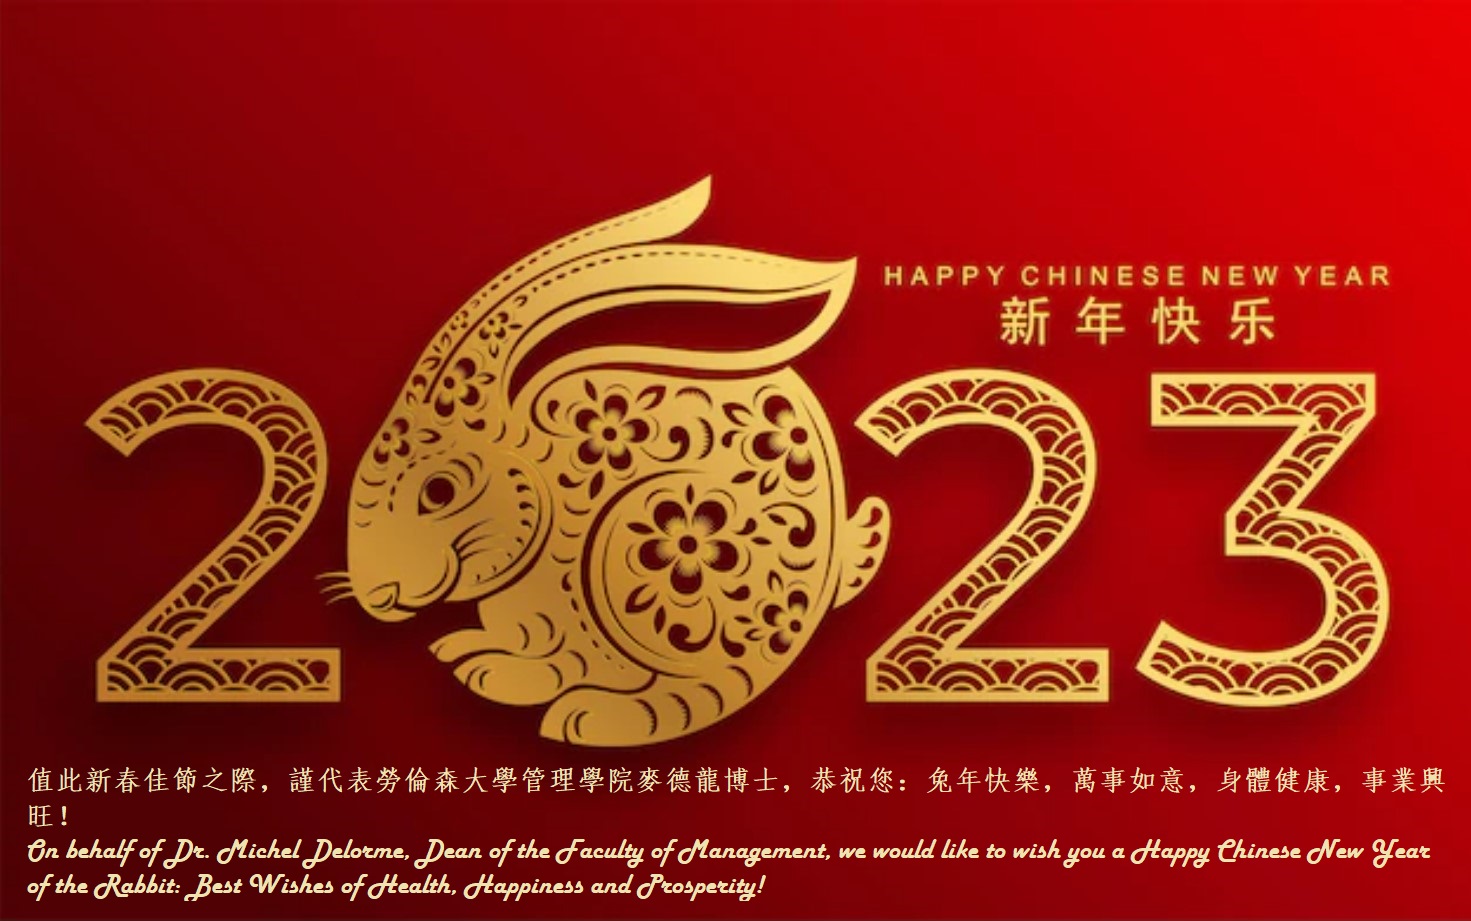 Happy Chinese New Year 2023- From the Faculty of Management-Image is red and gold with the rabbit